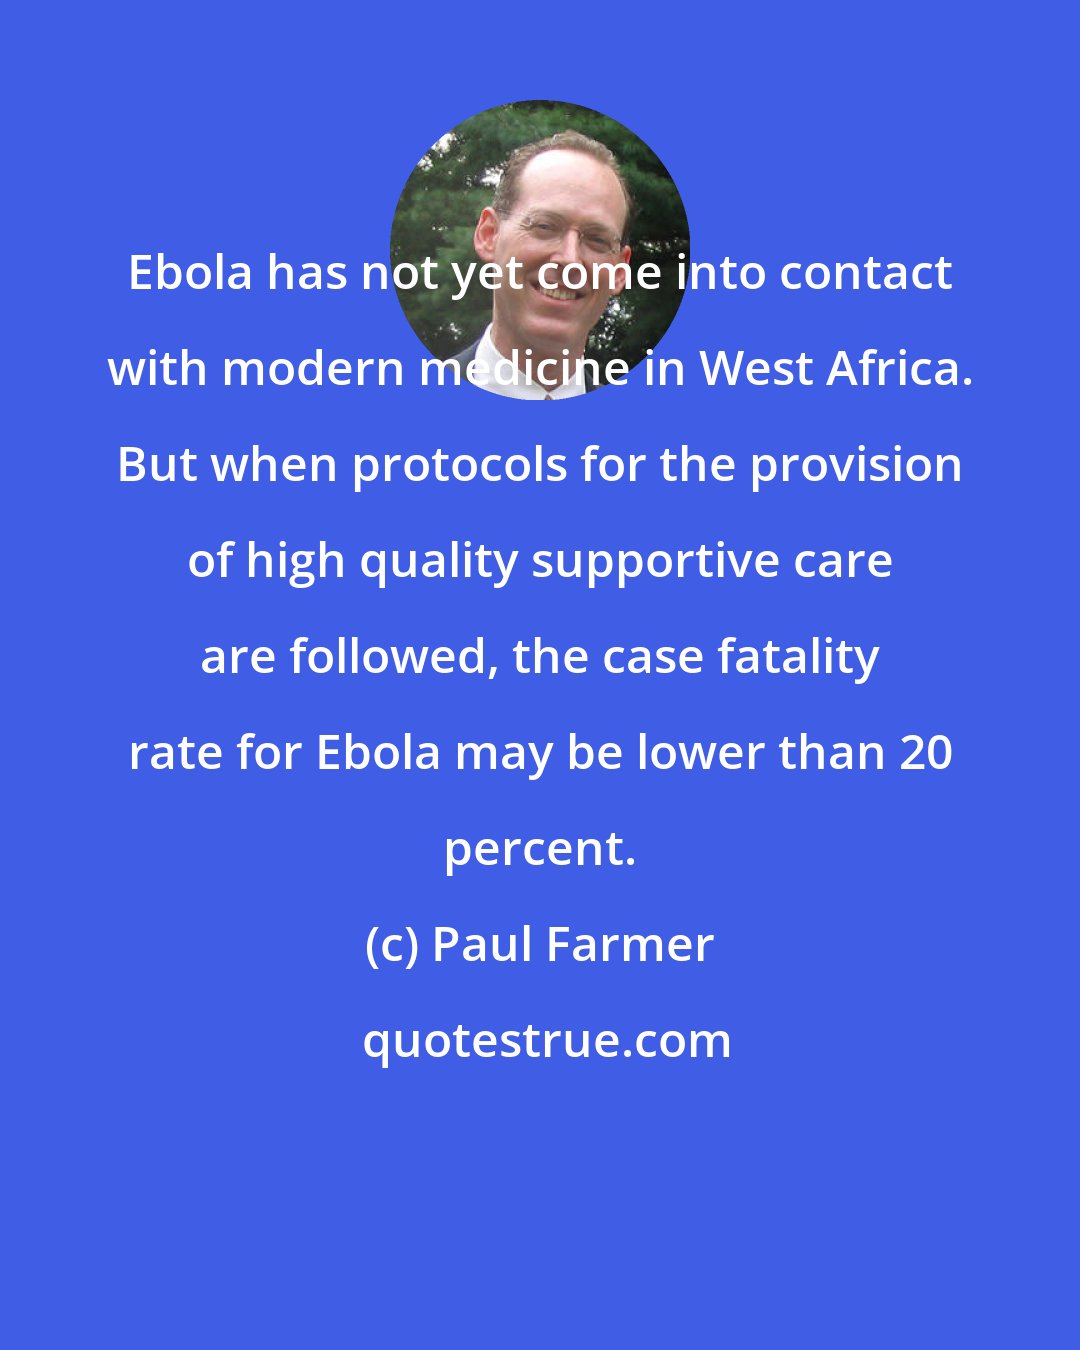 Paul Farmer: Ebola has not yet come into contact with modern medicine in West Africa. But when protocols for the provision of high quality supportive care are followed, the case fatality rate for Ebola may be lower than 20 percent.